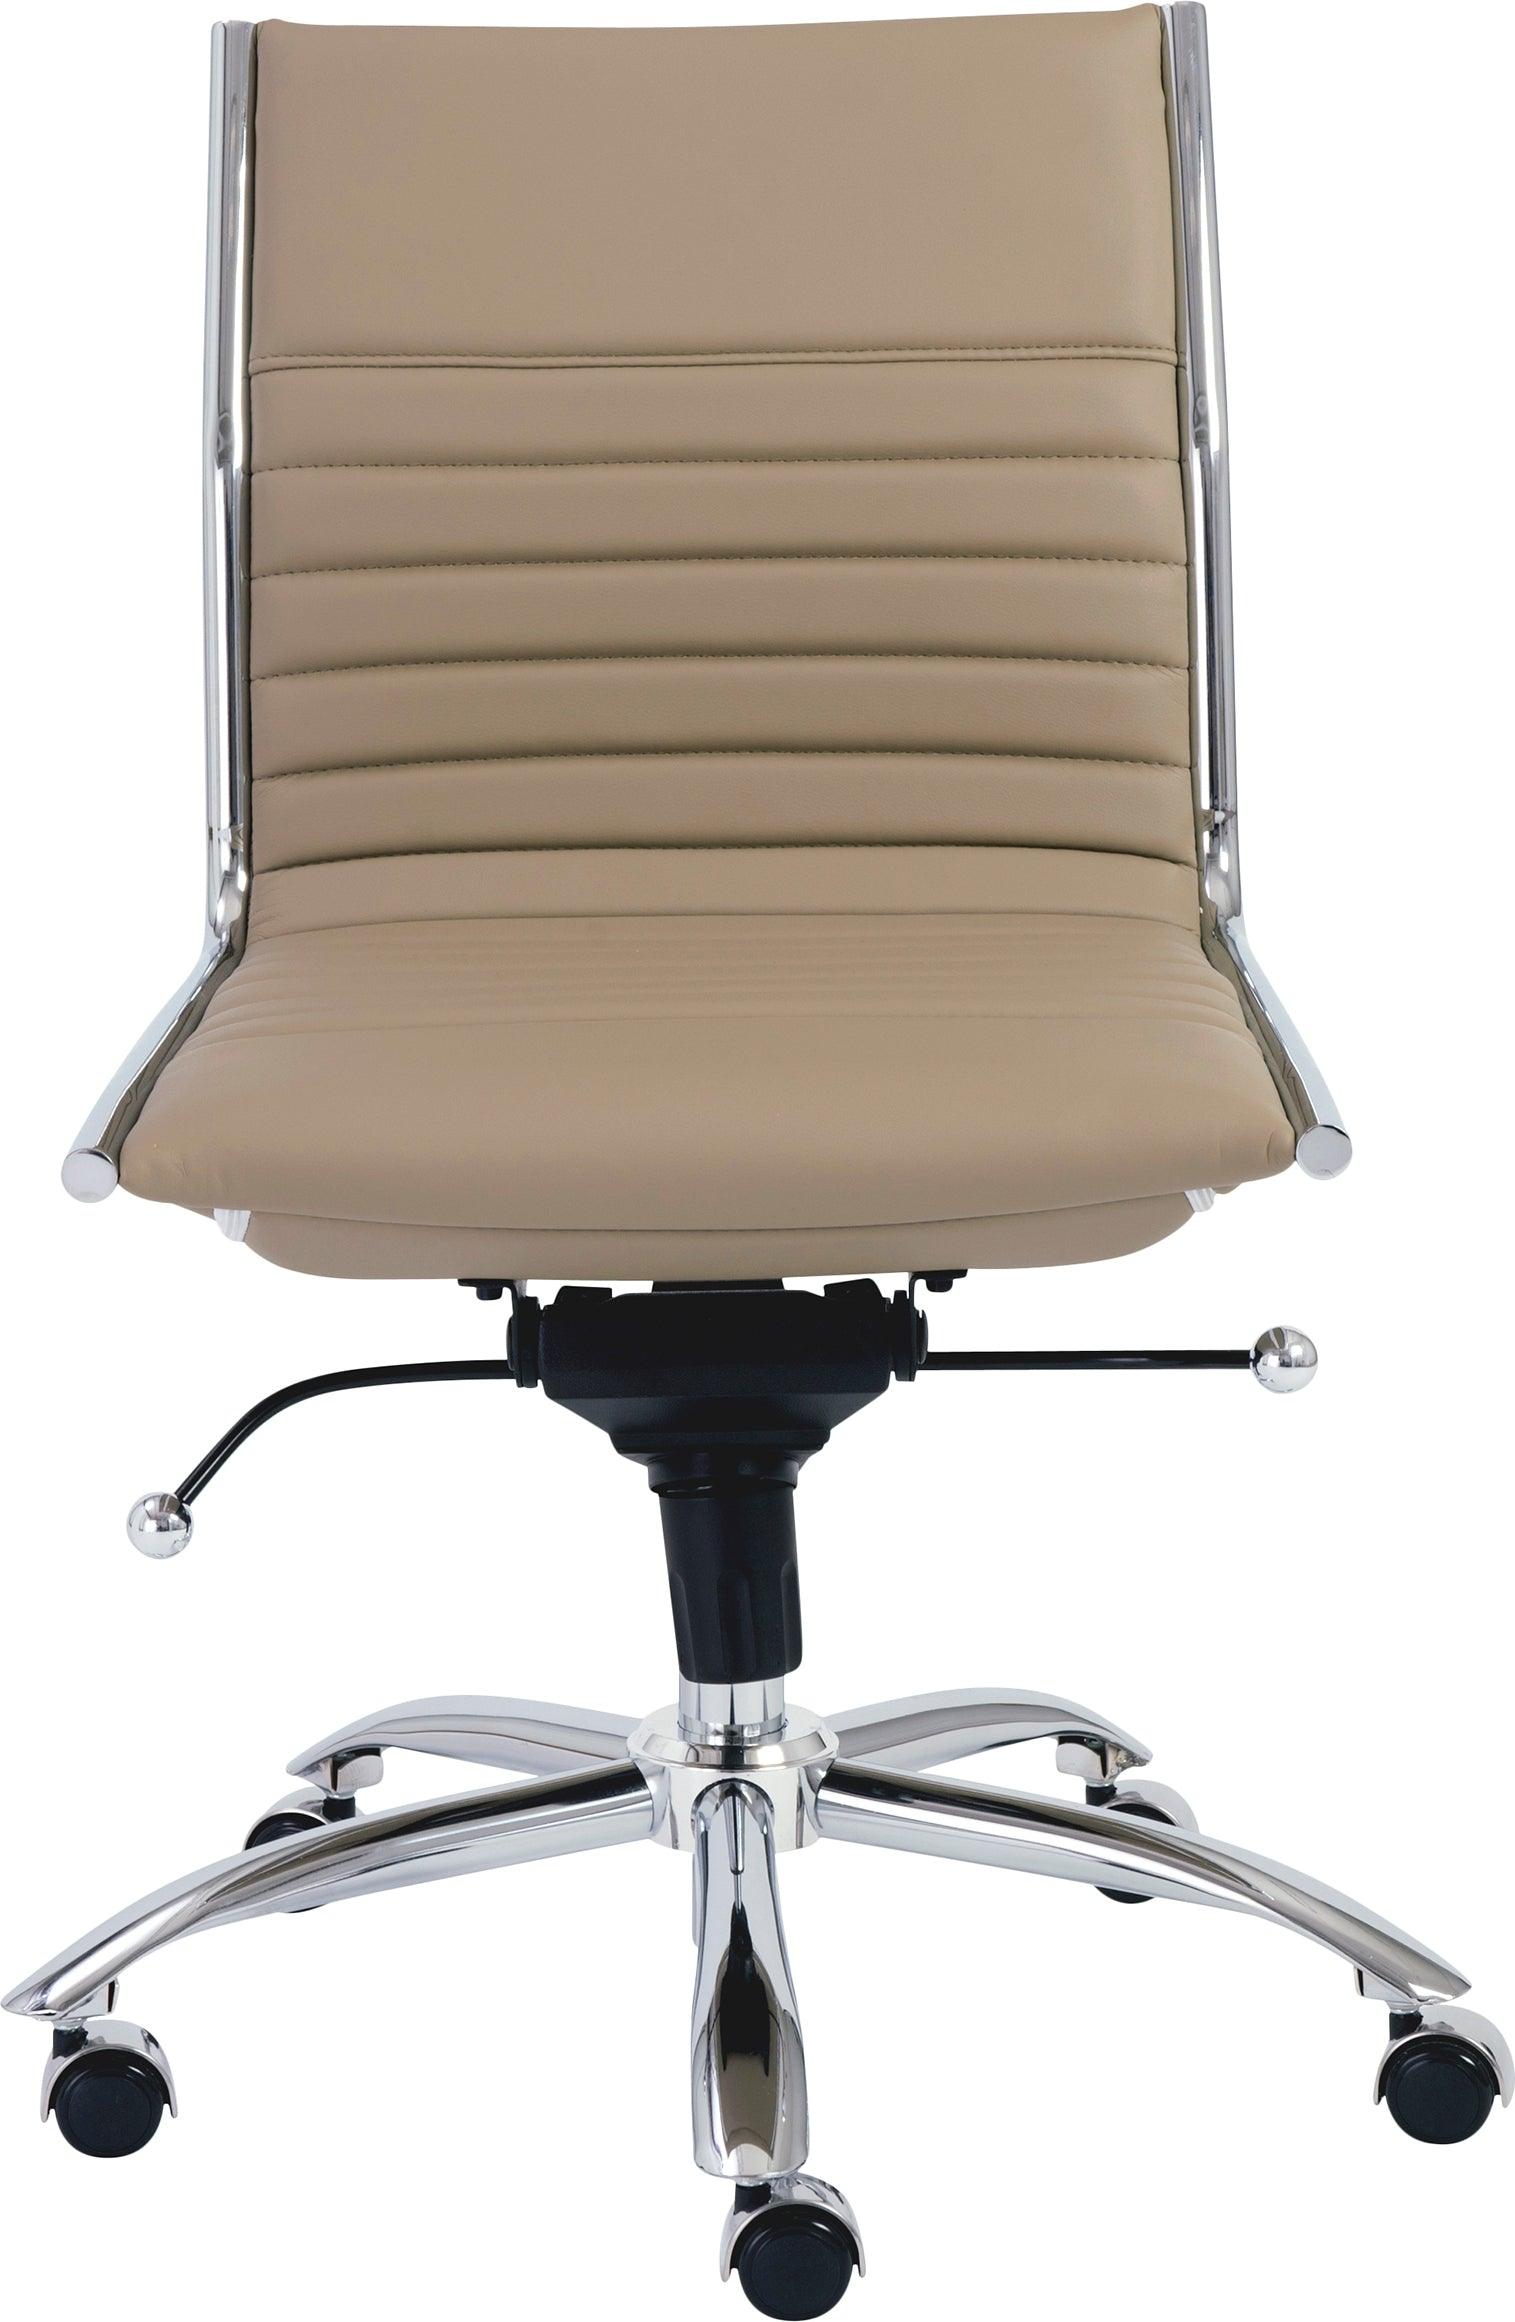 Dirk Taupe Leatherette Low Back Adjustable Office Chair - #5K196